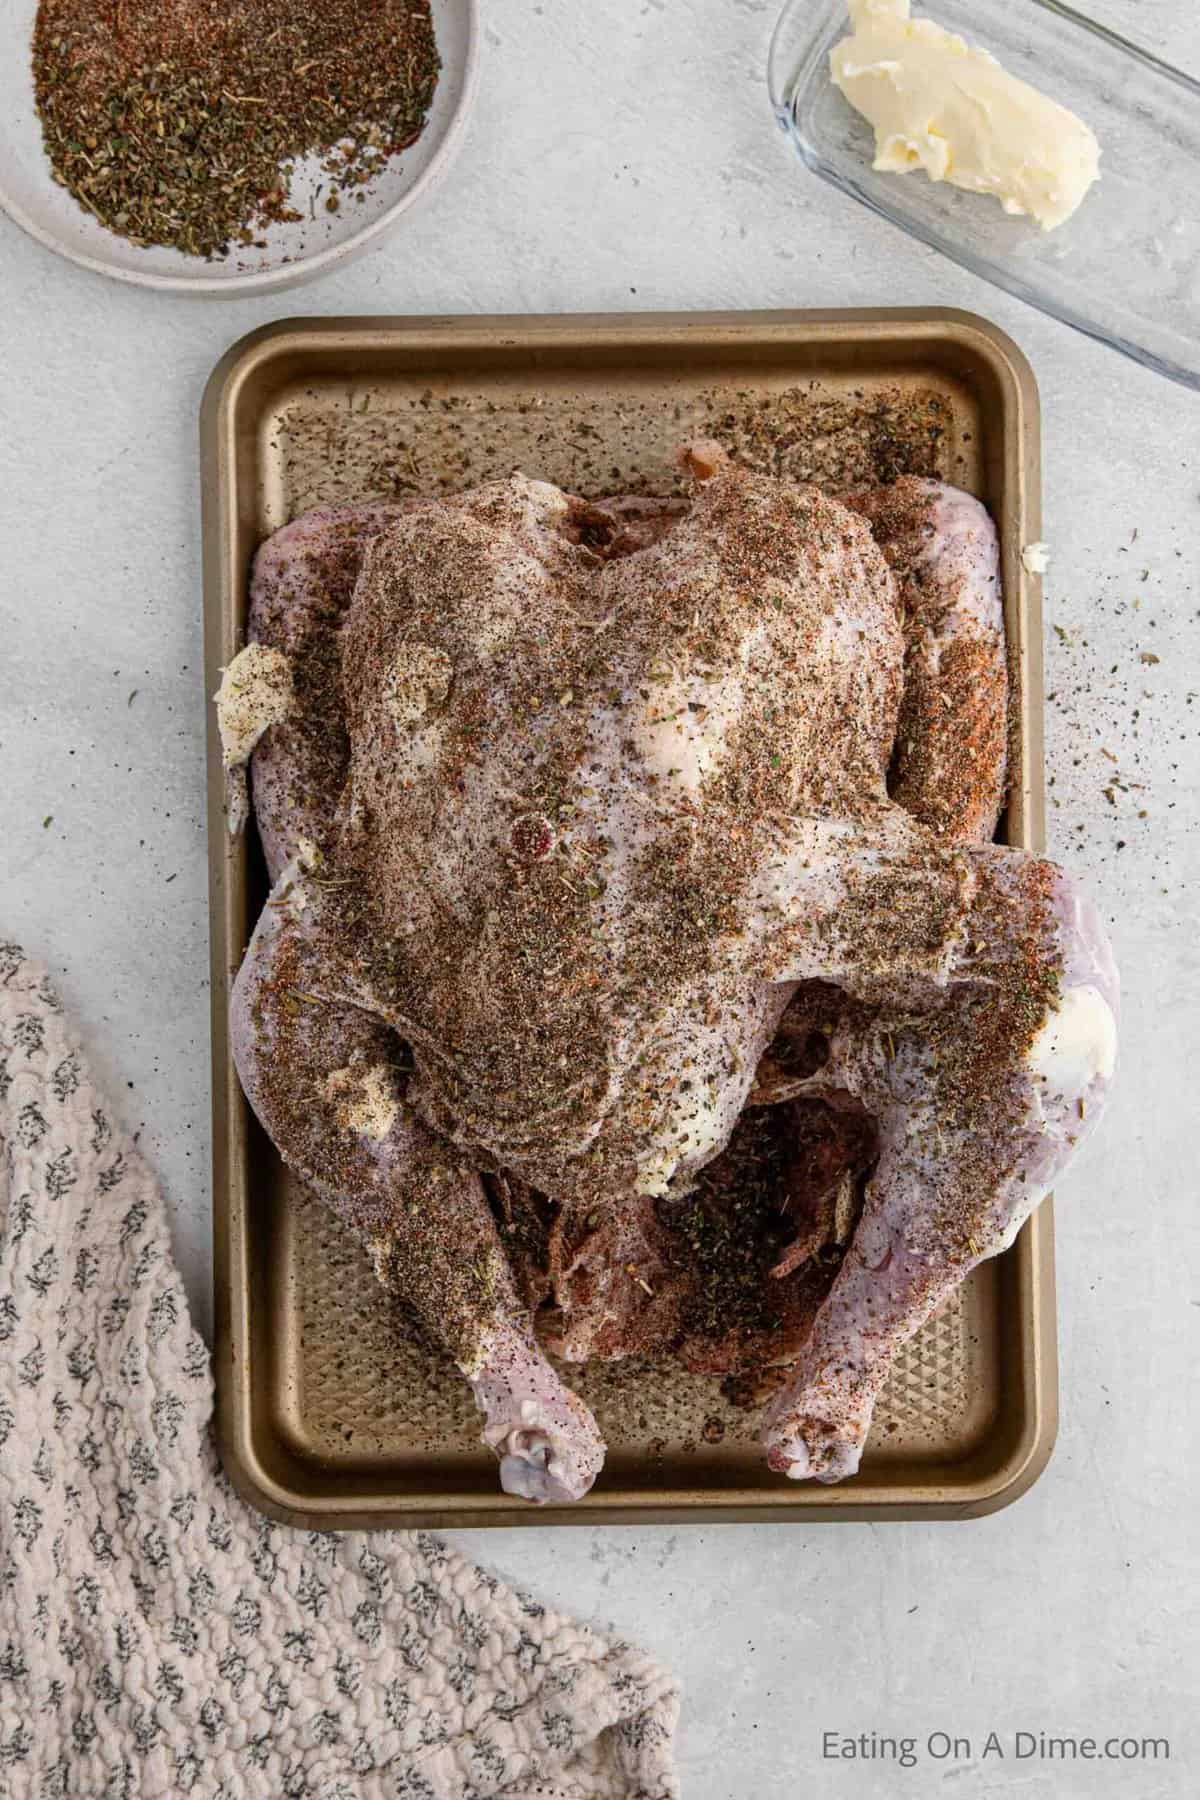 Rubbing the seasoning over the turkey on a baking sheet